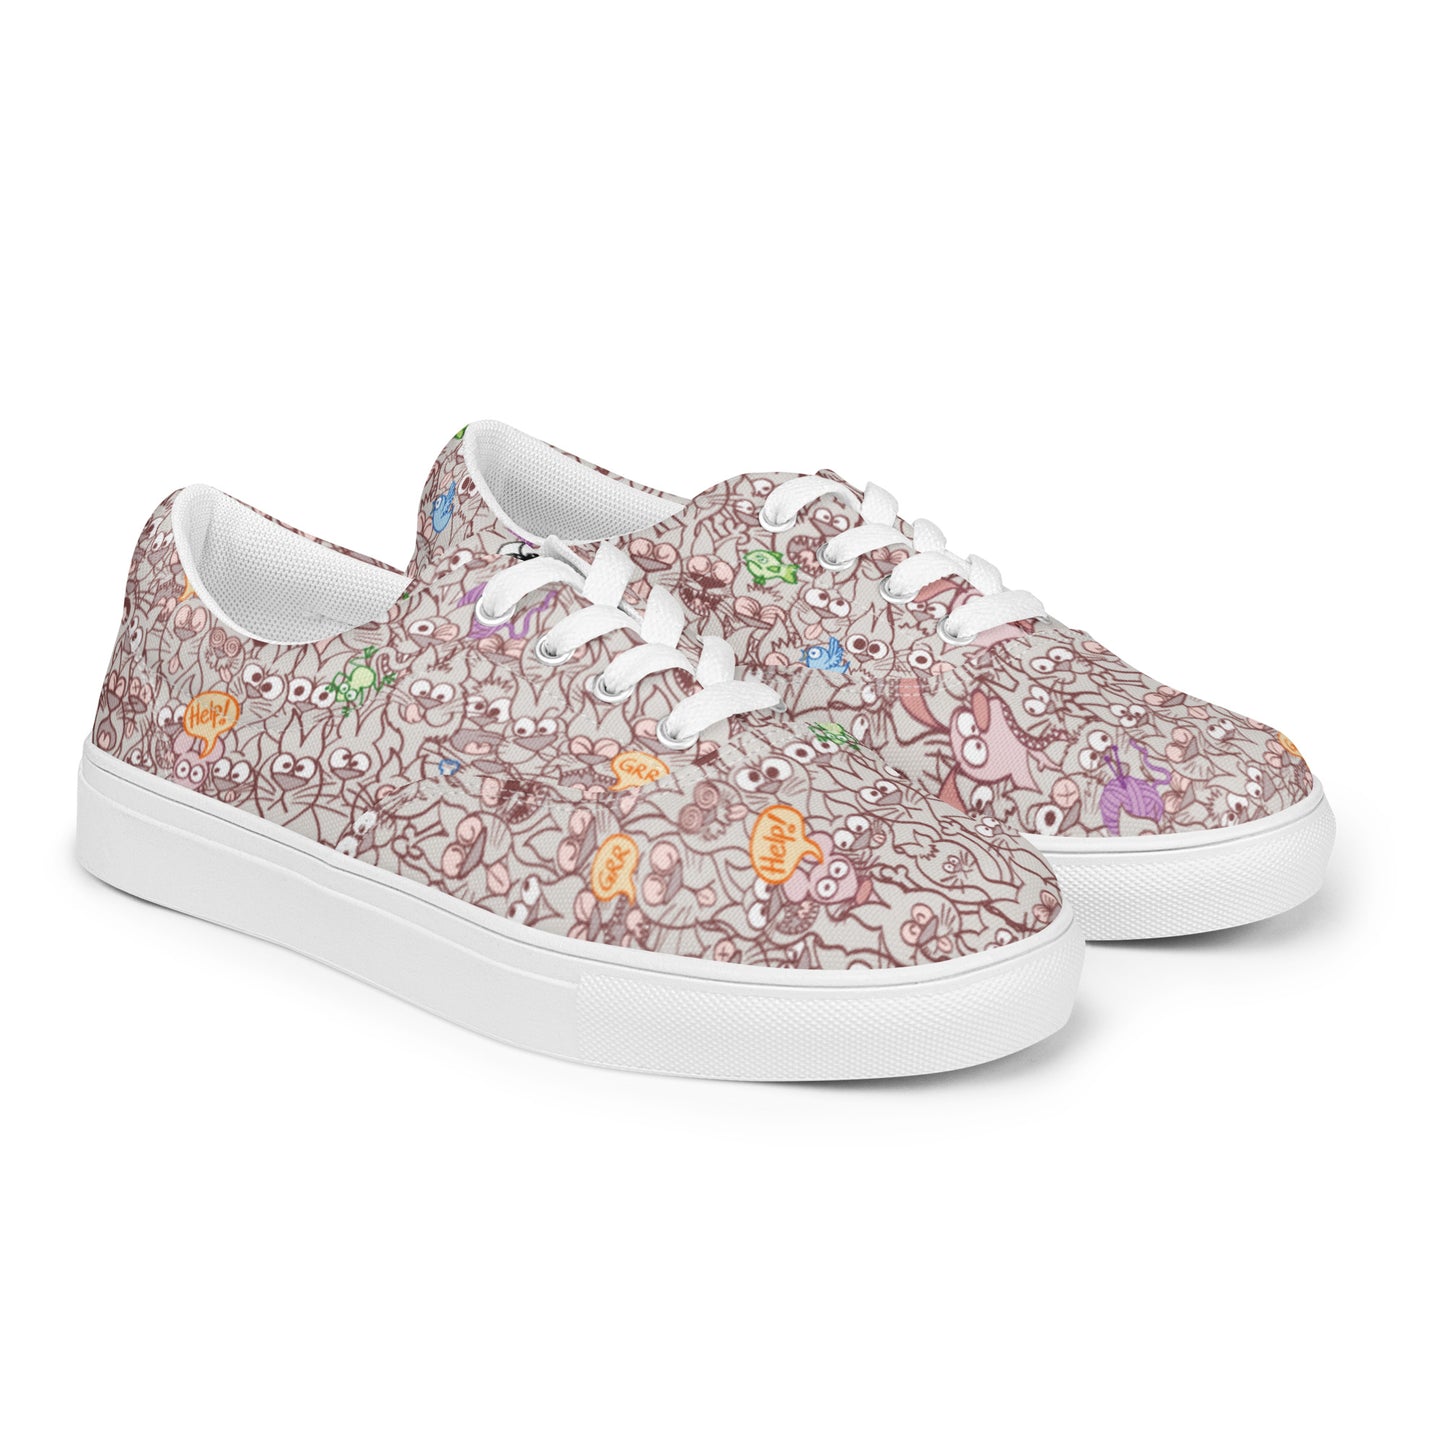 Exclusive design only for real cat lovers Women’s lace-up canvas shoes. Overview